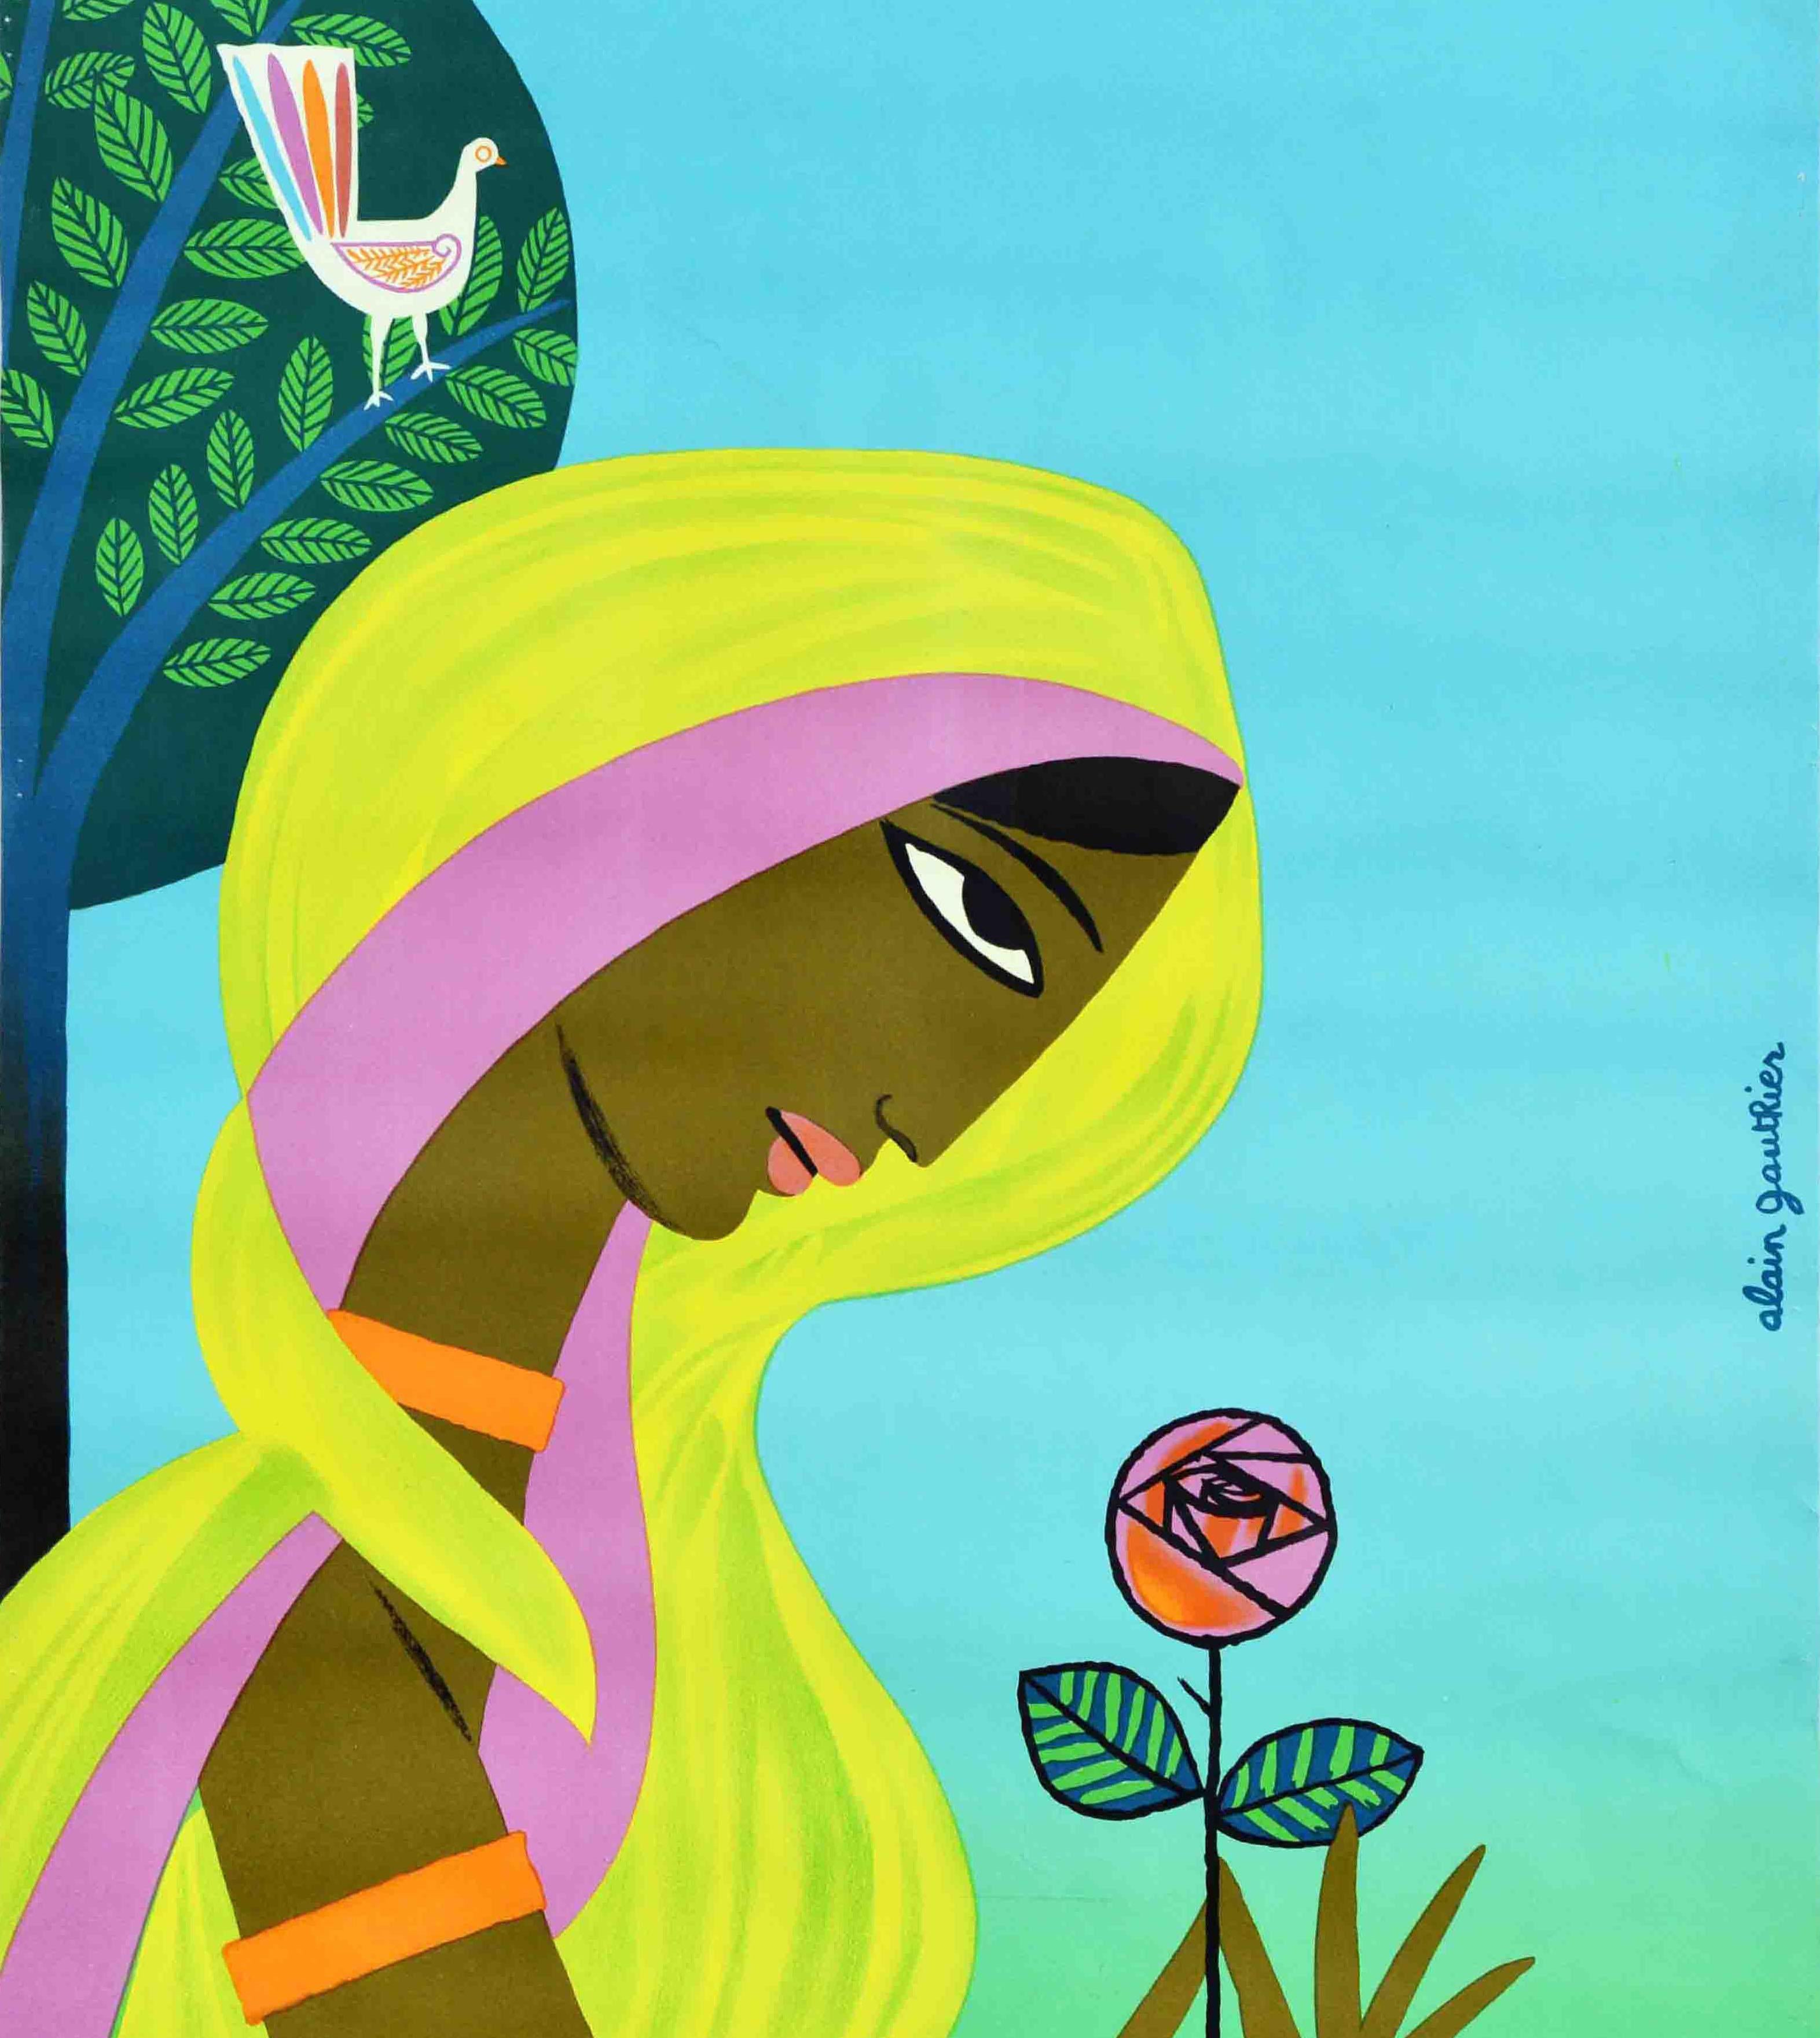 Original vintage travel poster - Kuwait Airways Pakistan - featuring a colourful design by Alan Gauthier (b 1939) of a lady in a headscarf holding a rose flower in front of a bird in a tree with the bold title text and airline logo above. Good